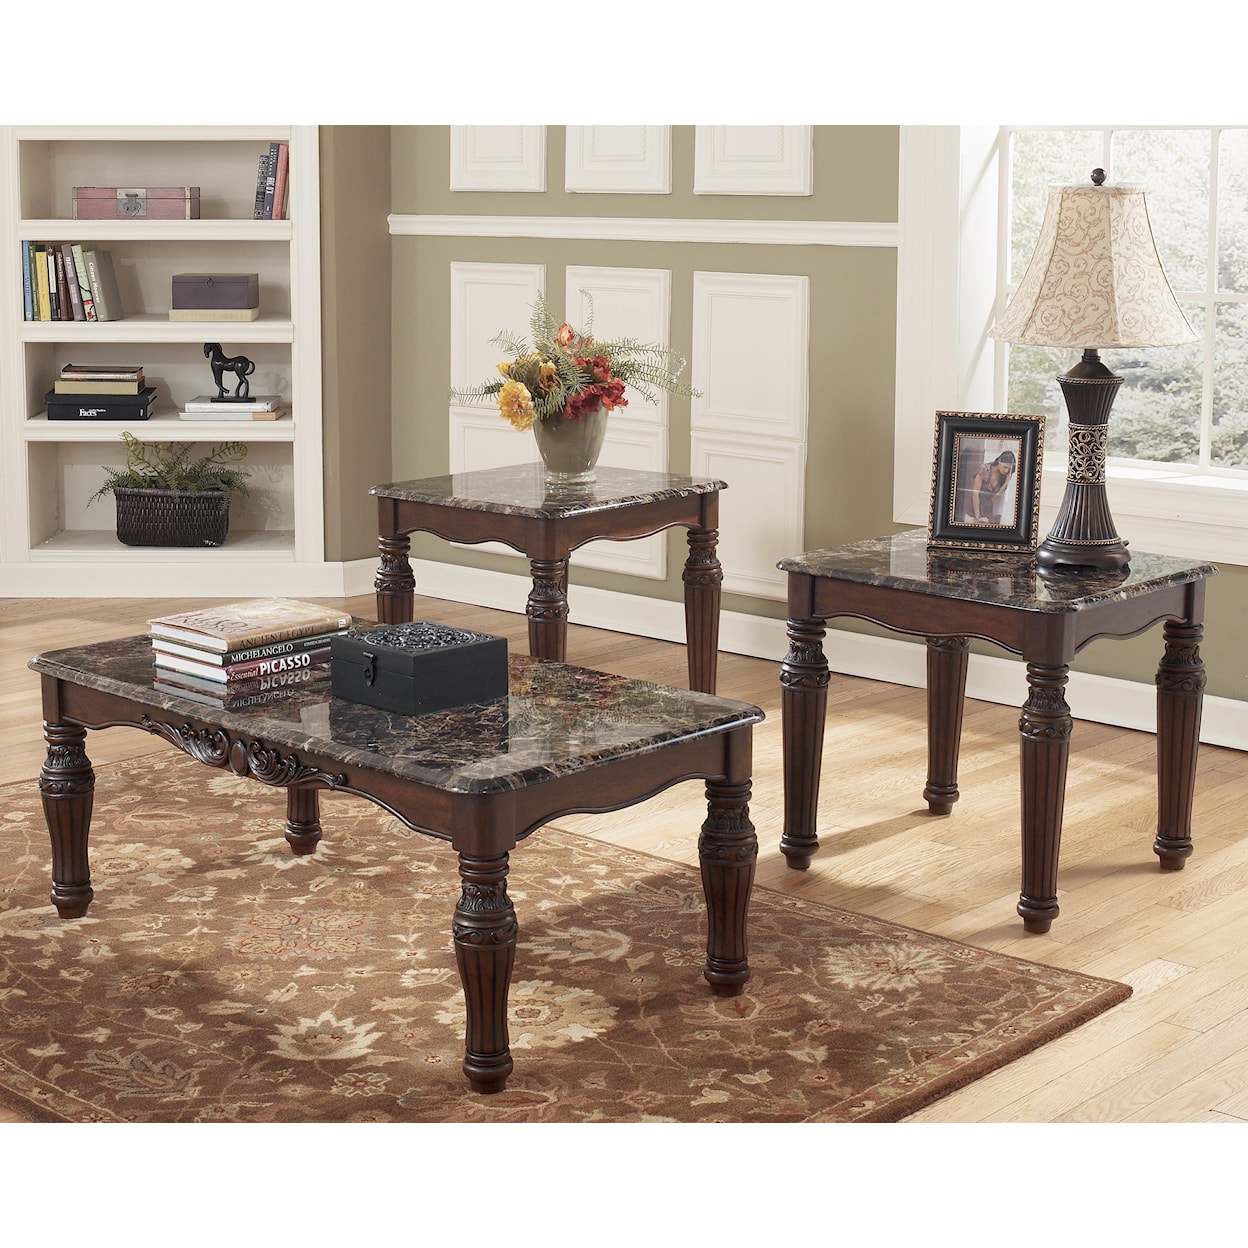 Signature Design by Ashley North Shore 3-in-1 Pack of Occasional Tables